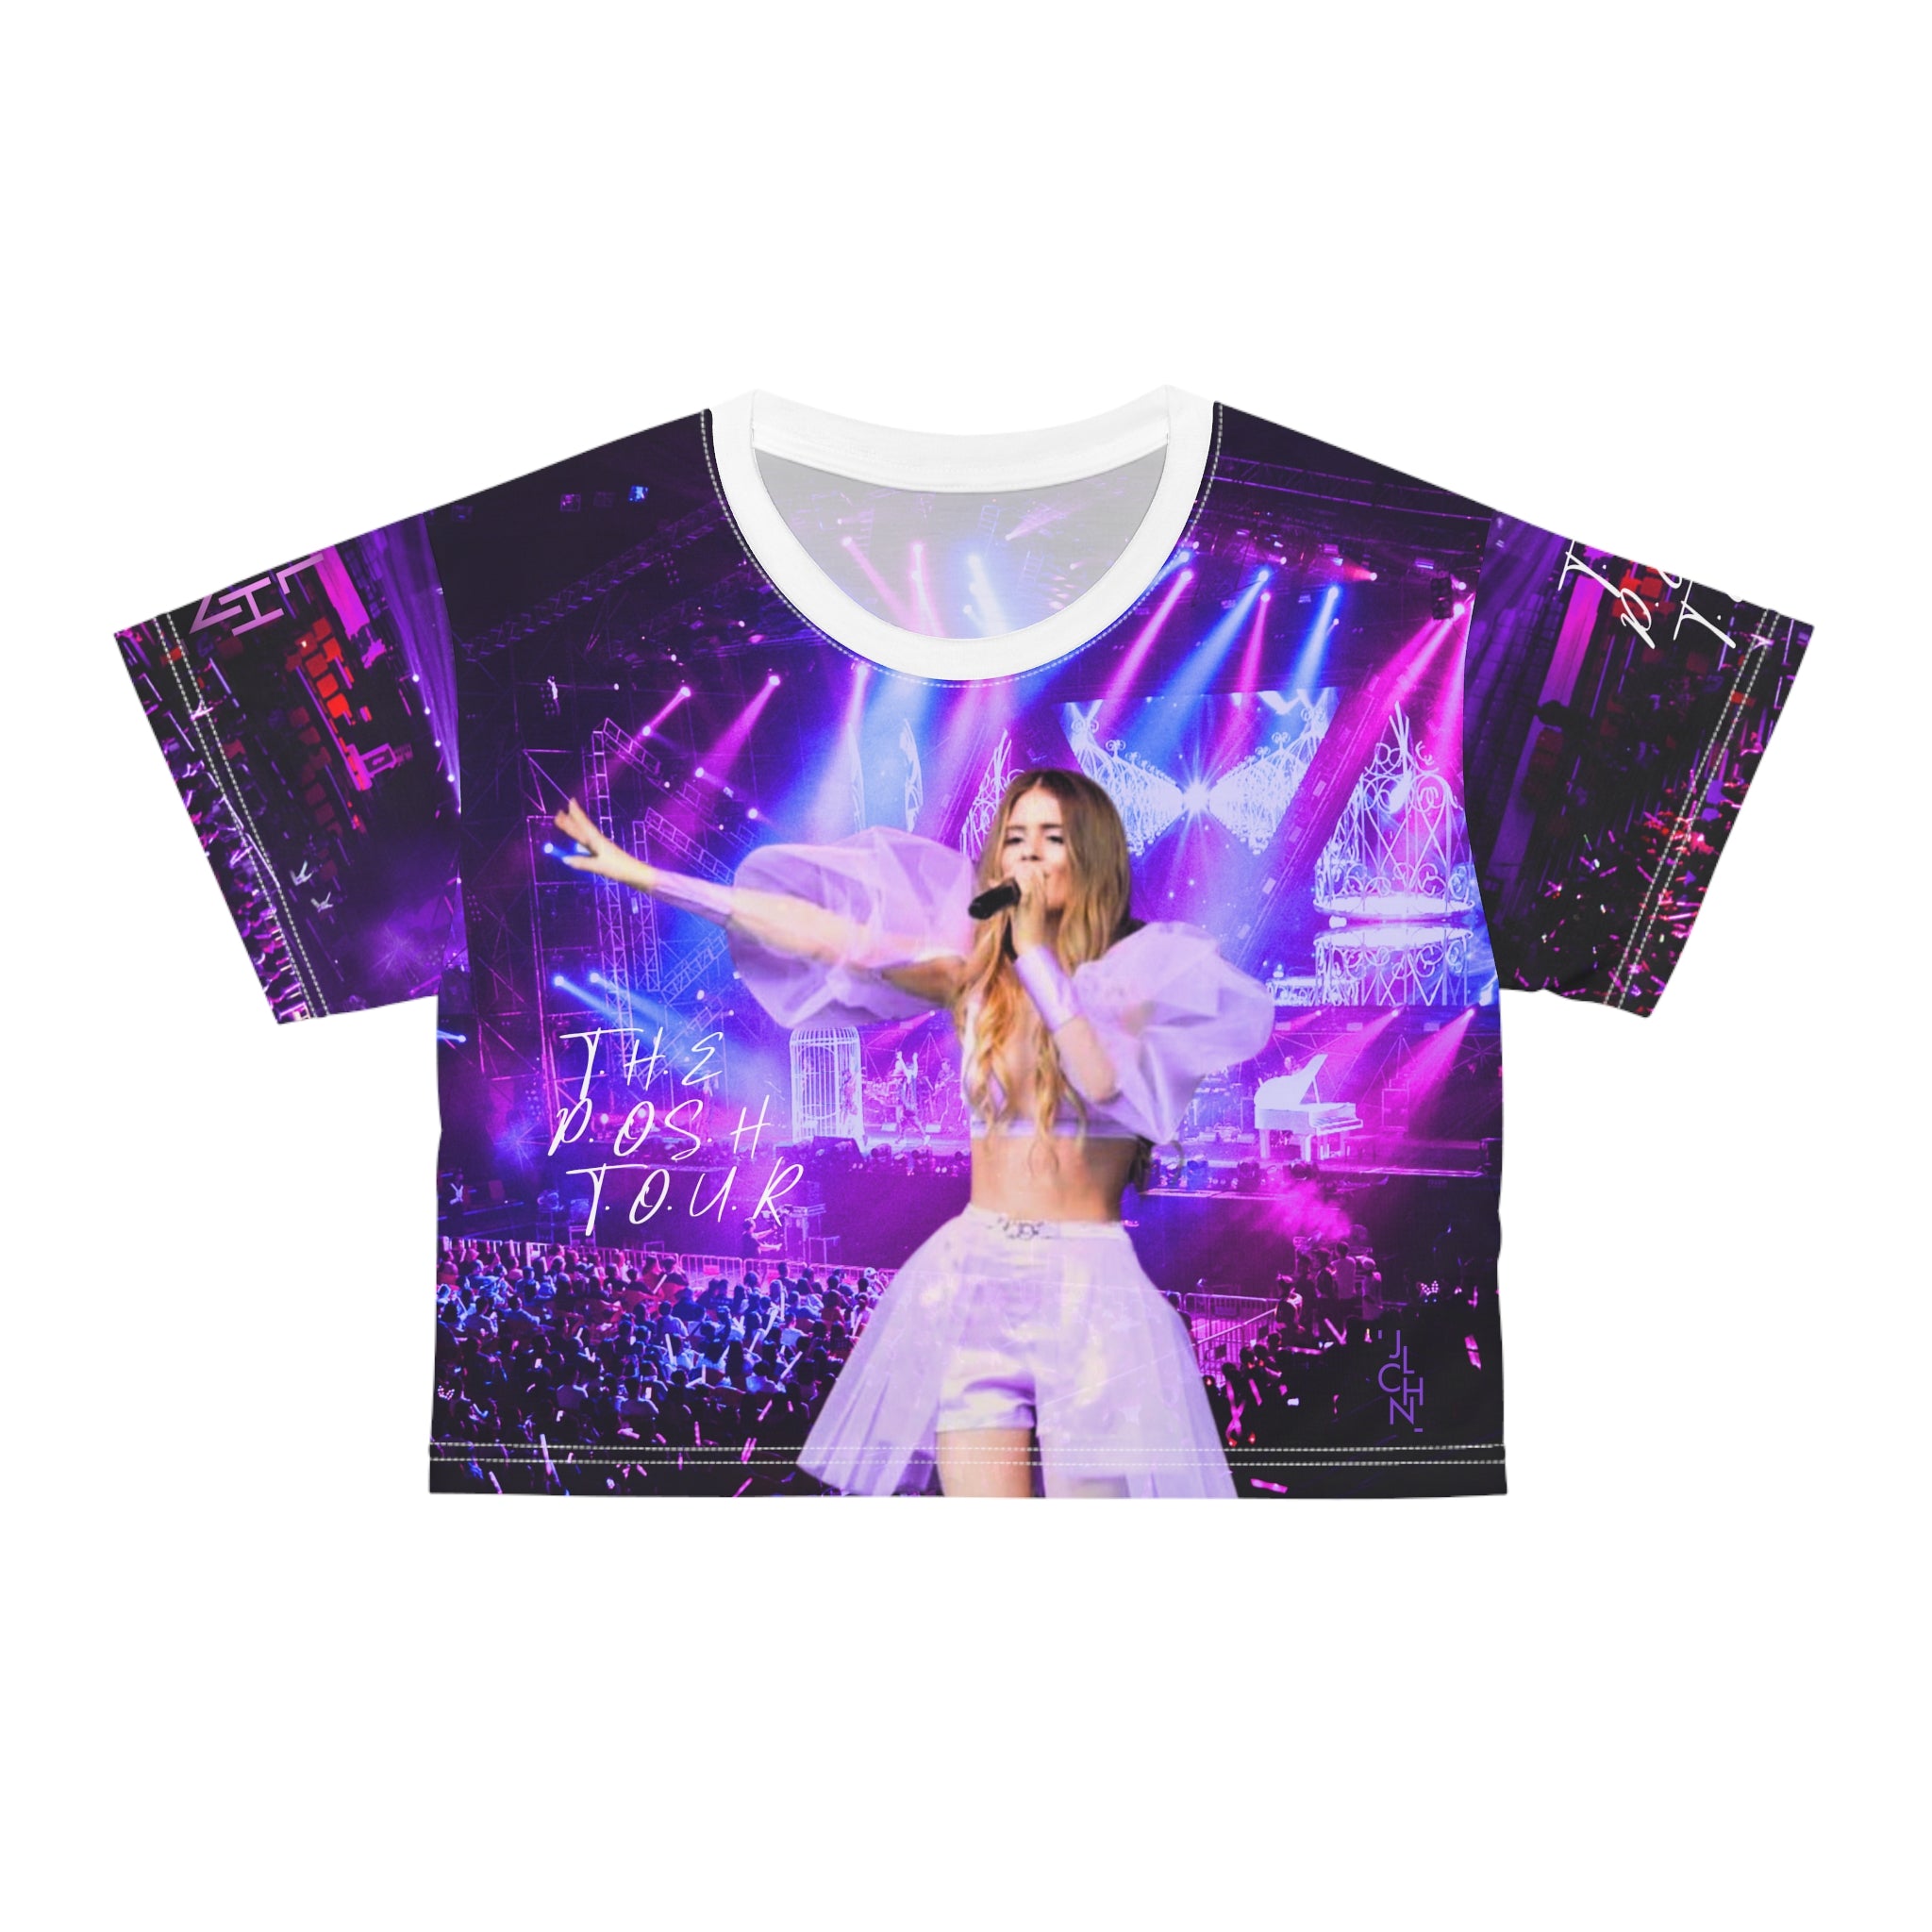 Express Your Style - Personalized Crop Top Featuring Juli Chan's Key Visual from 'The Posh Tour'